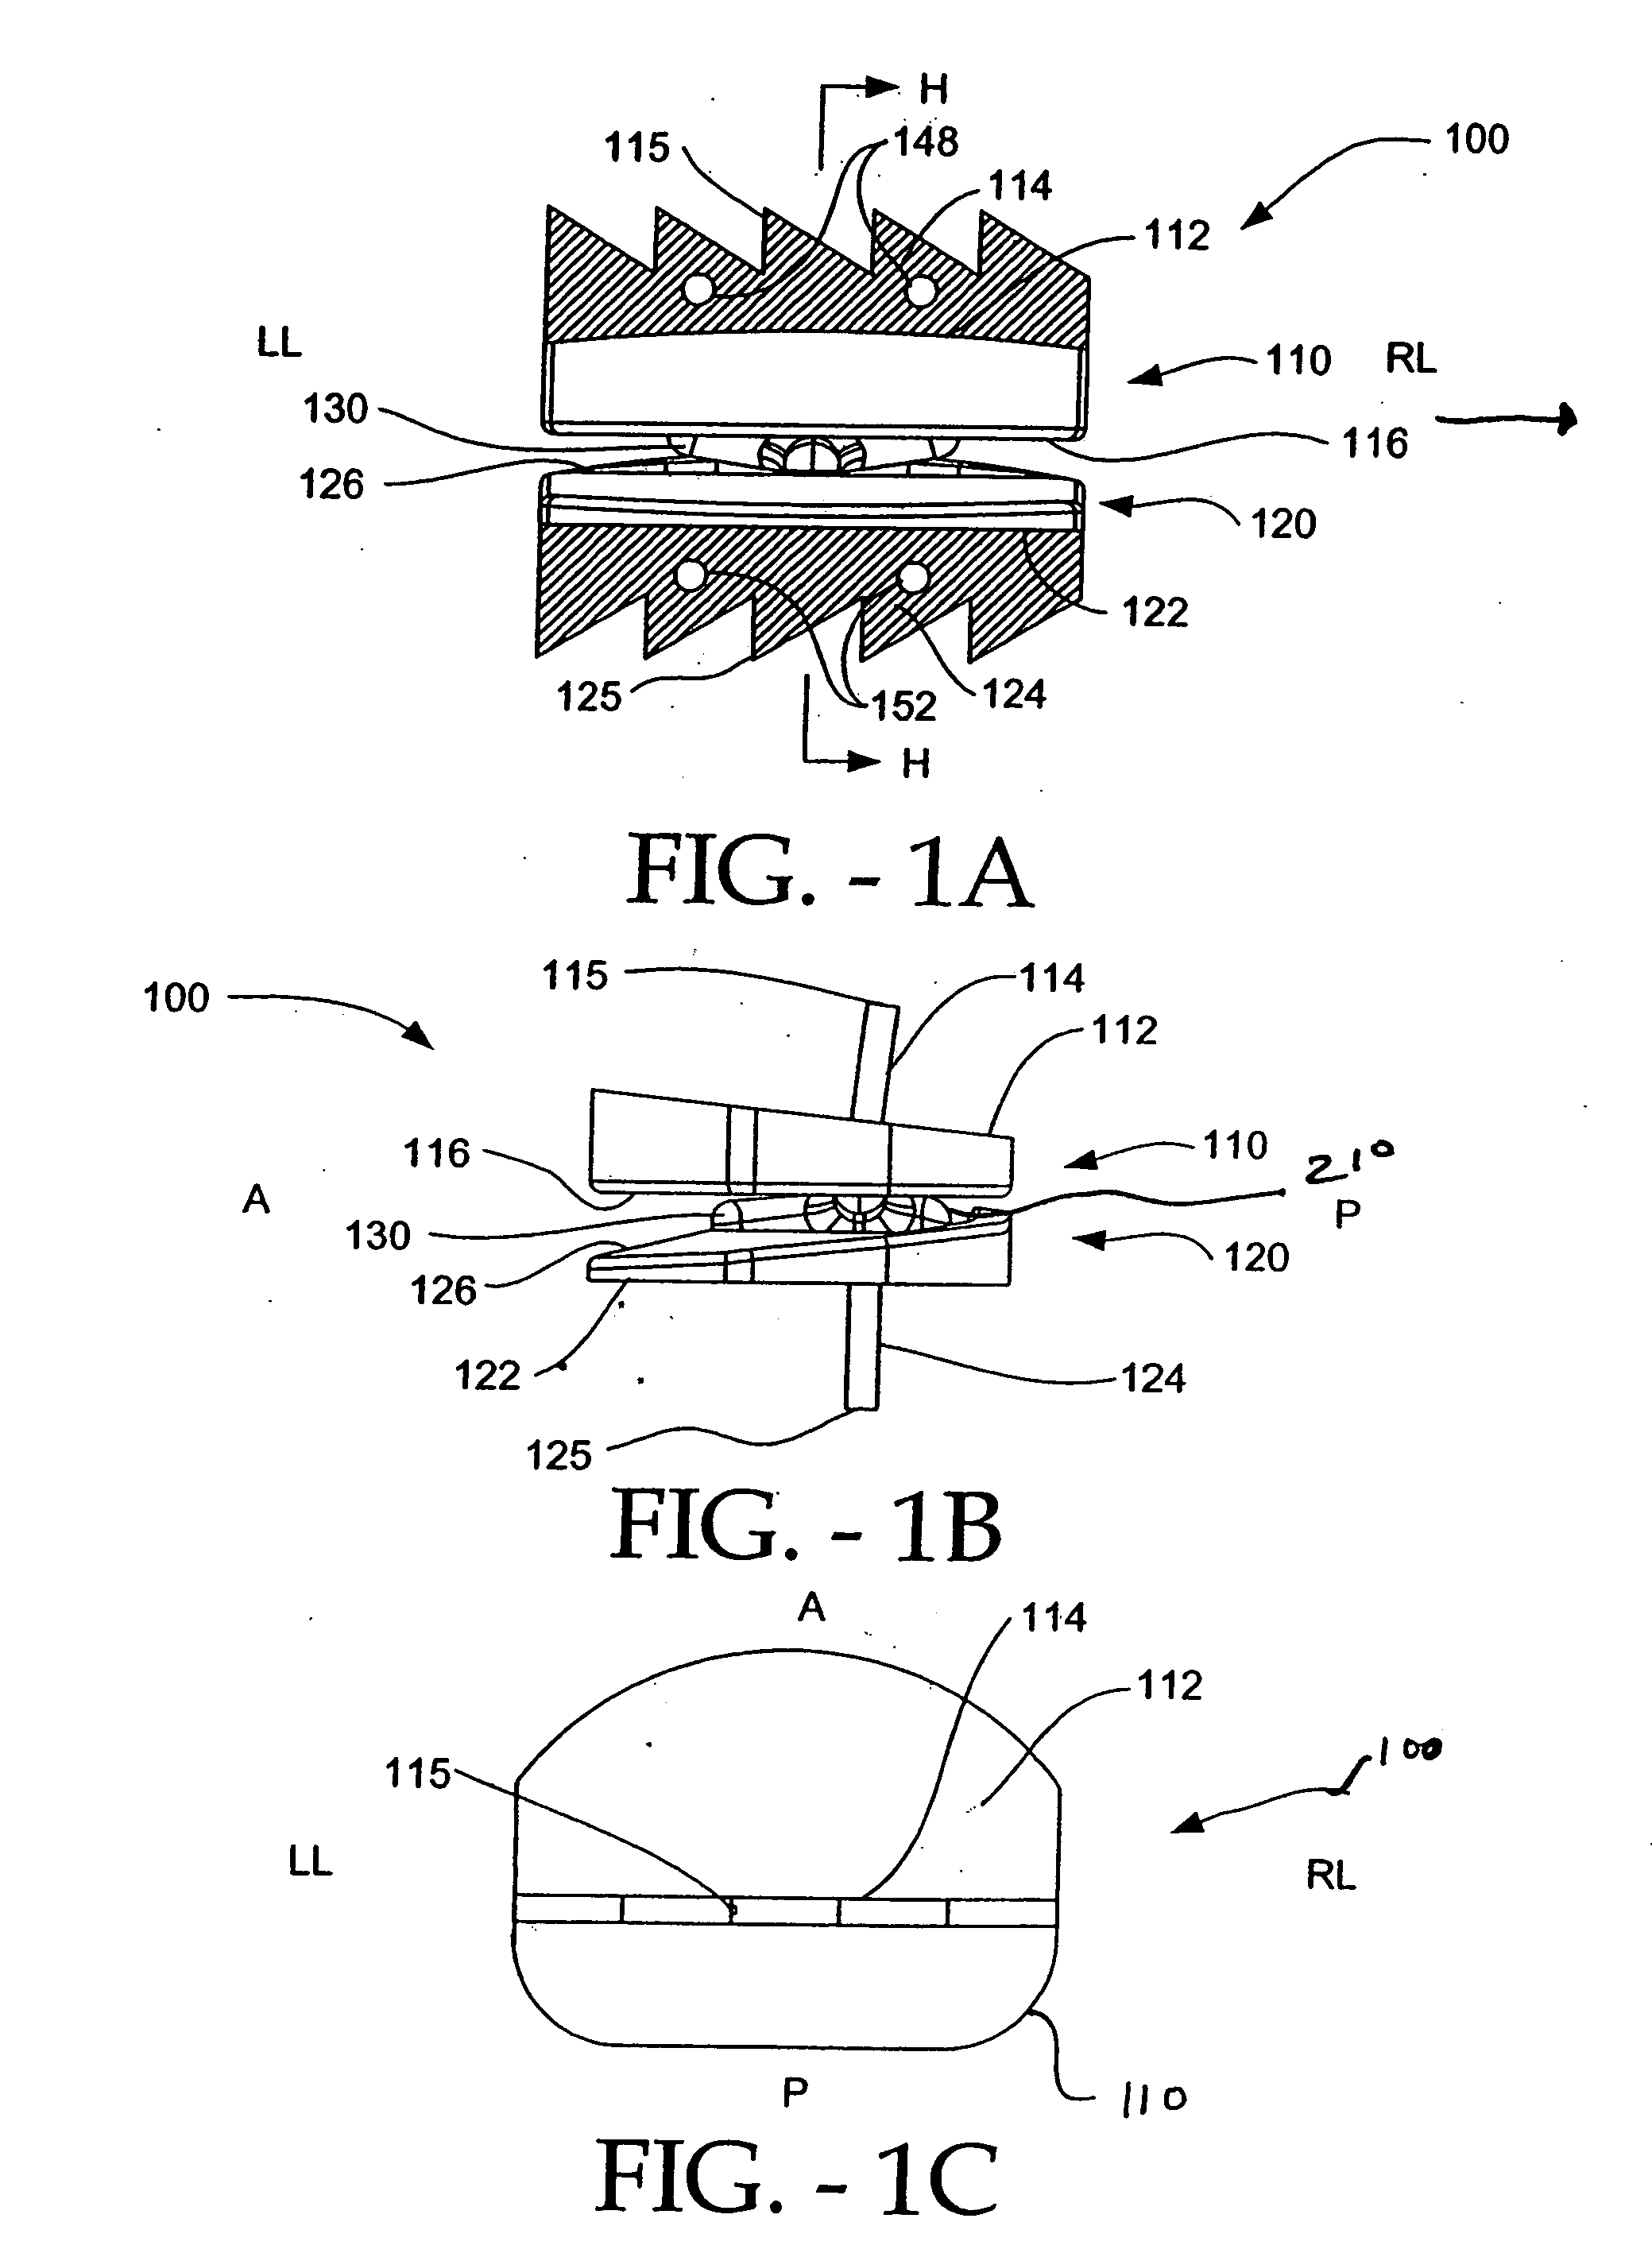 Method of laterally inserting an artificial vertebral disk replacement implant with crossbar spacer